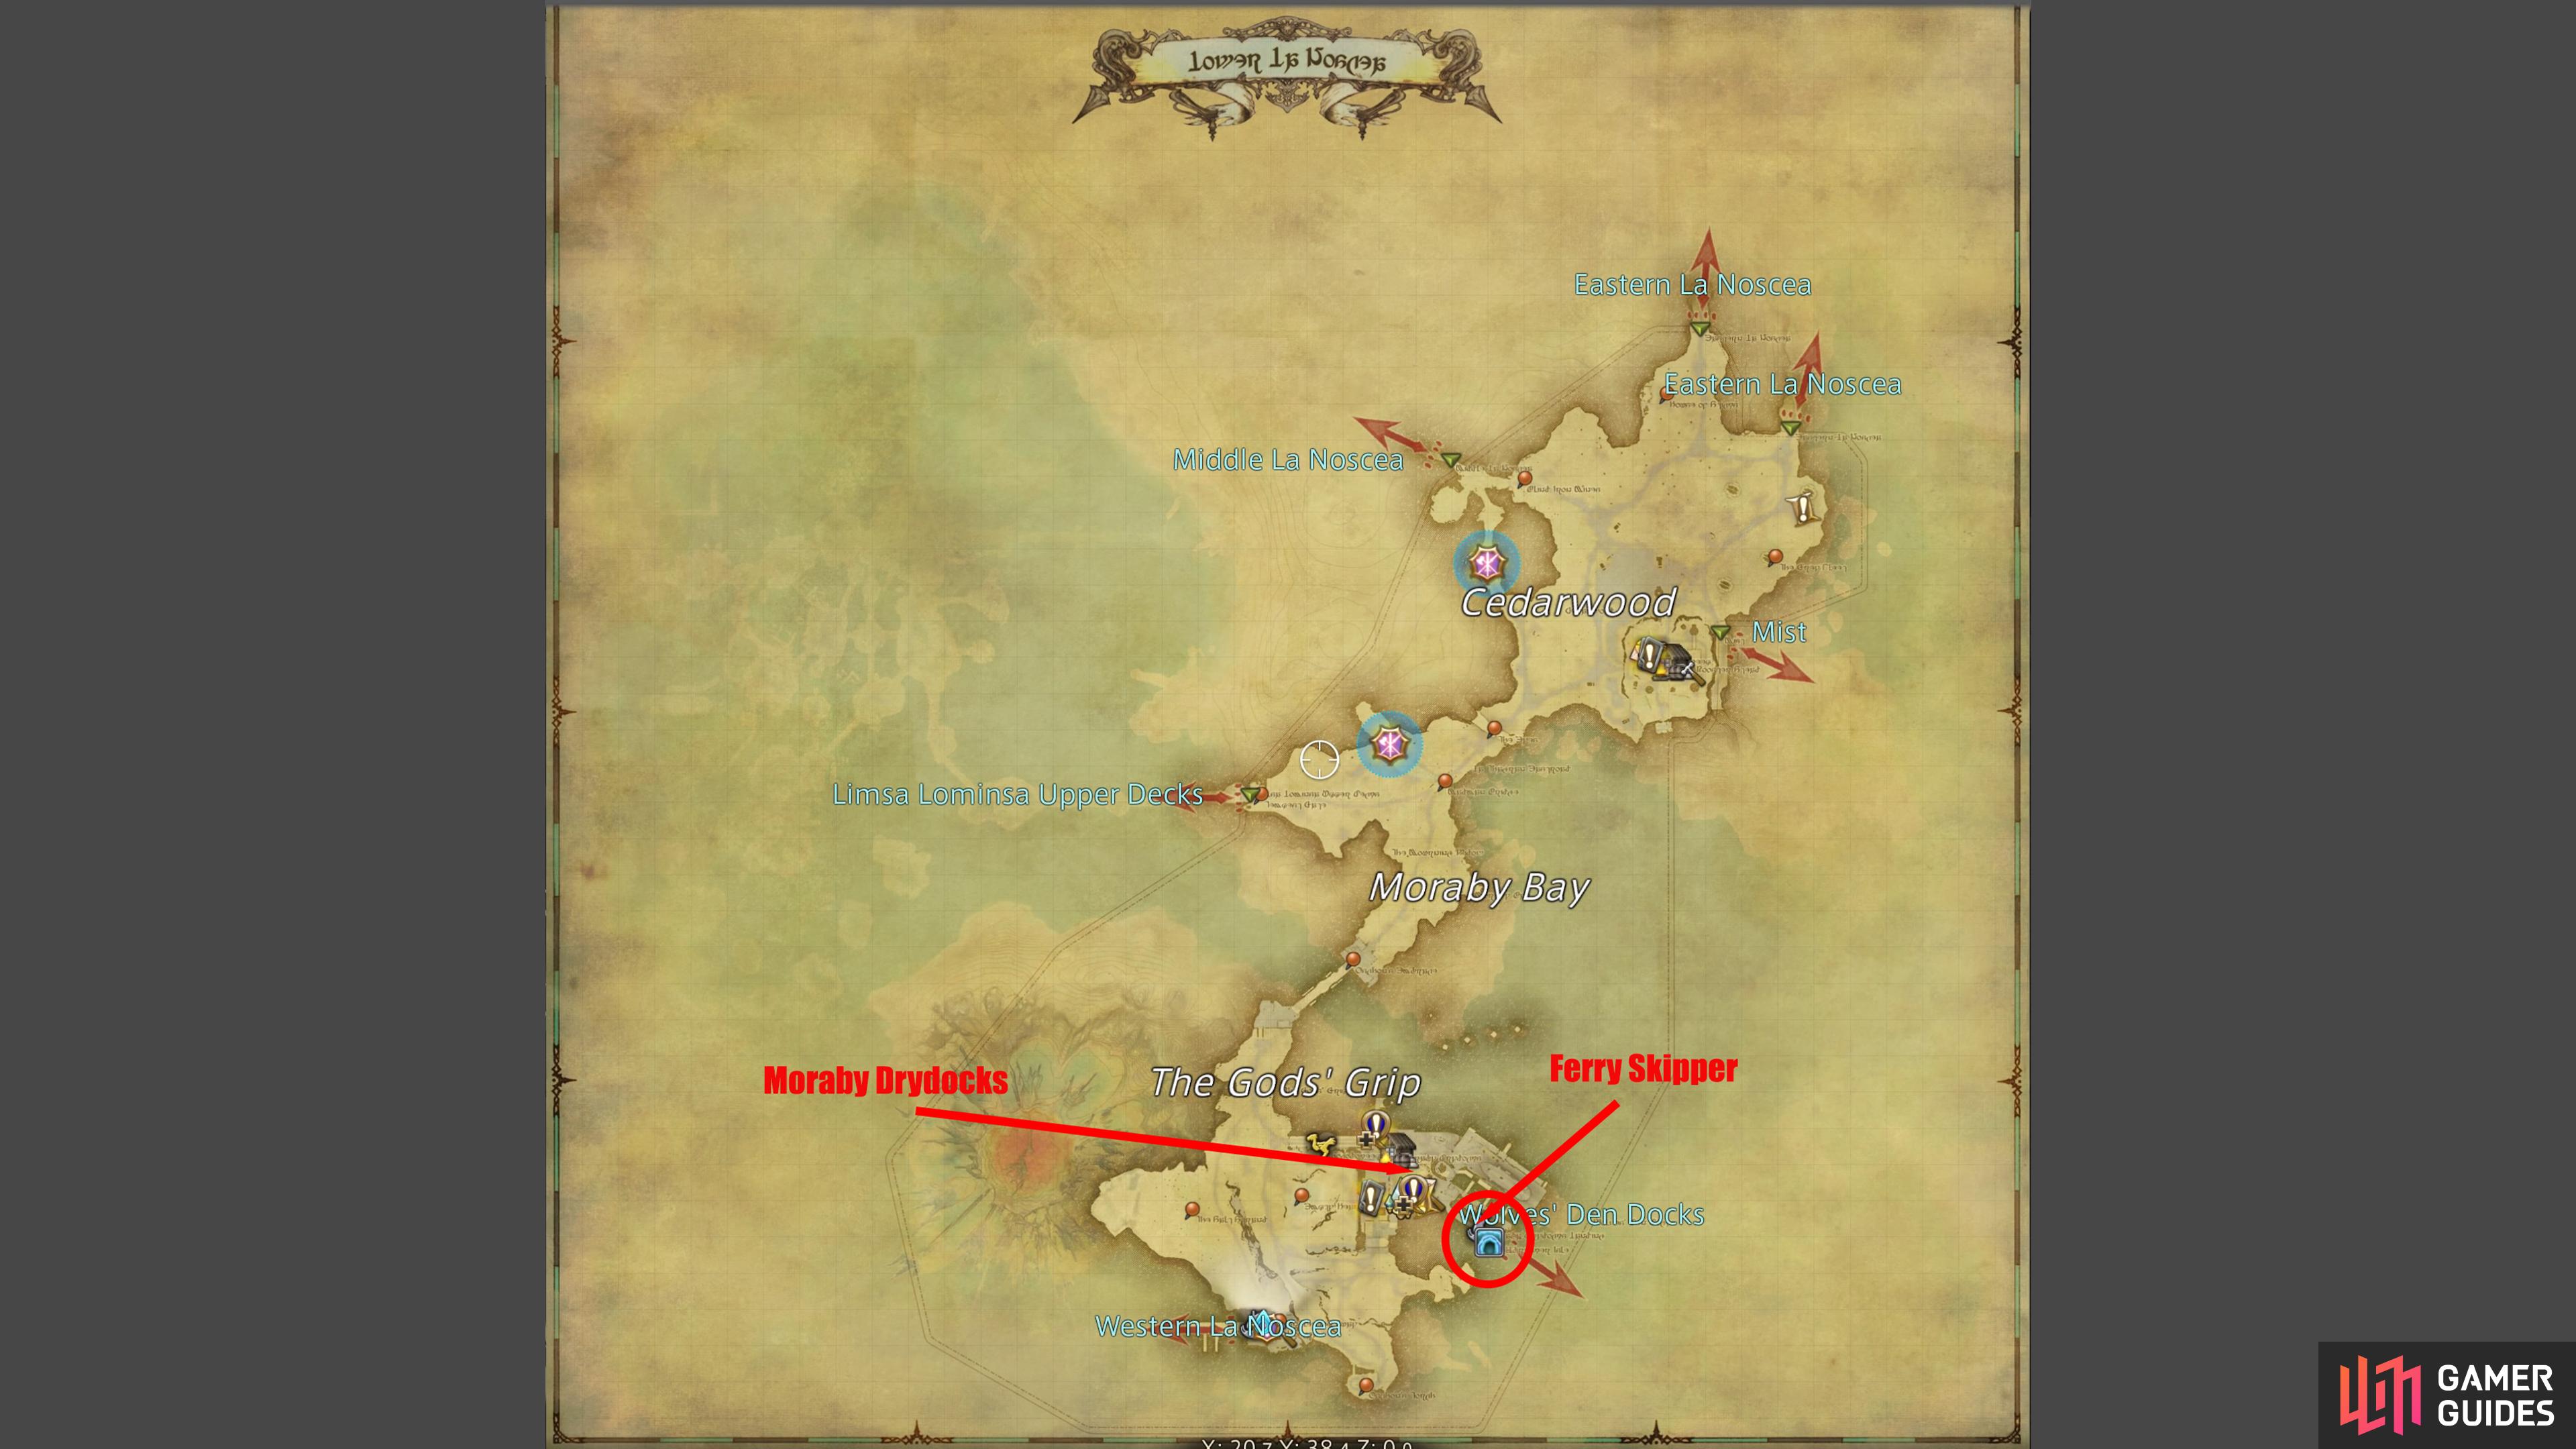 You can find Moraby Drydocks and the Ferry Skipper to Wolves' Den in the south of Lower La Noscea.